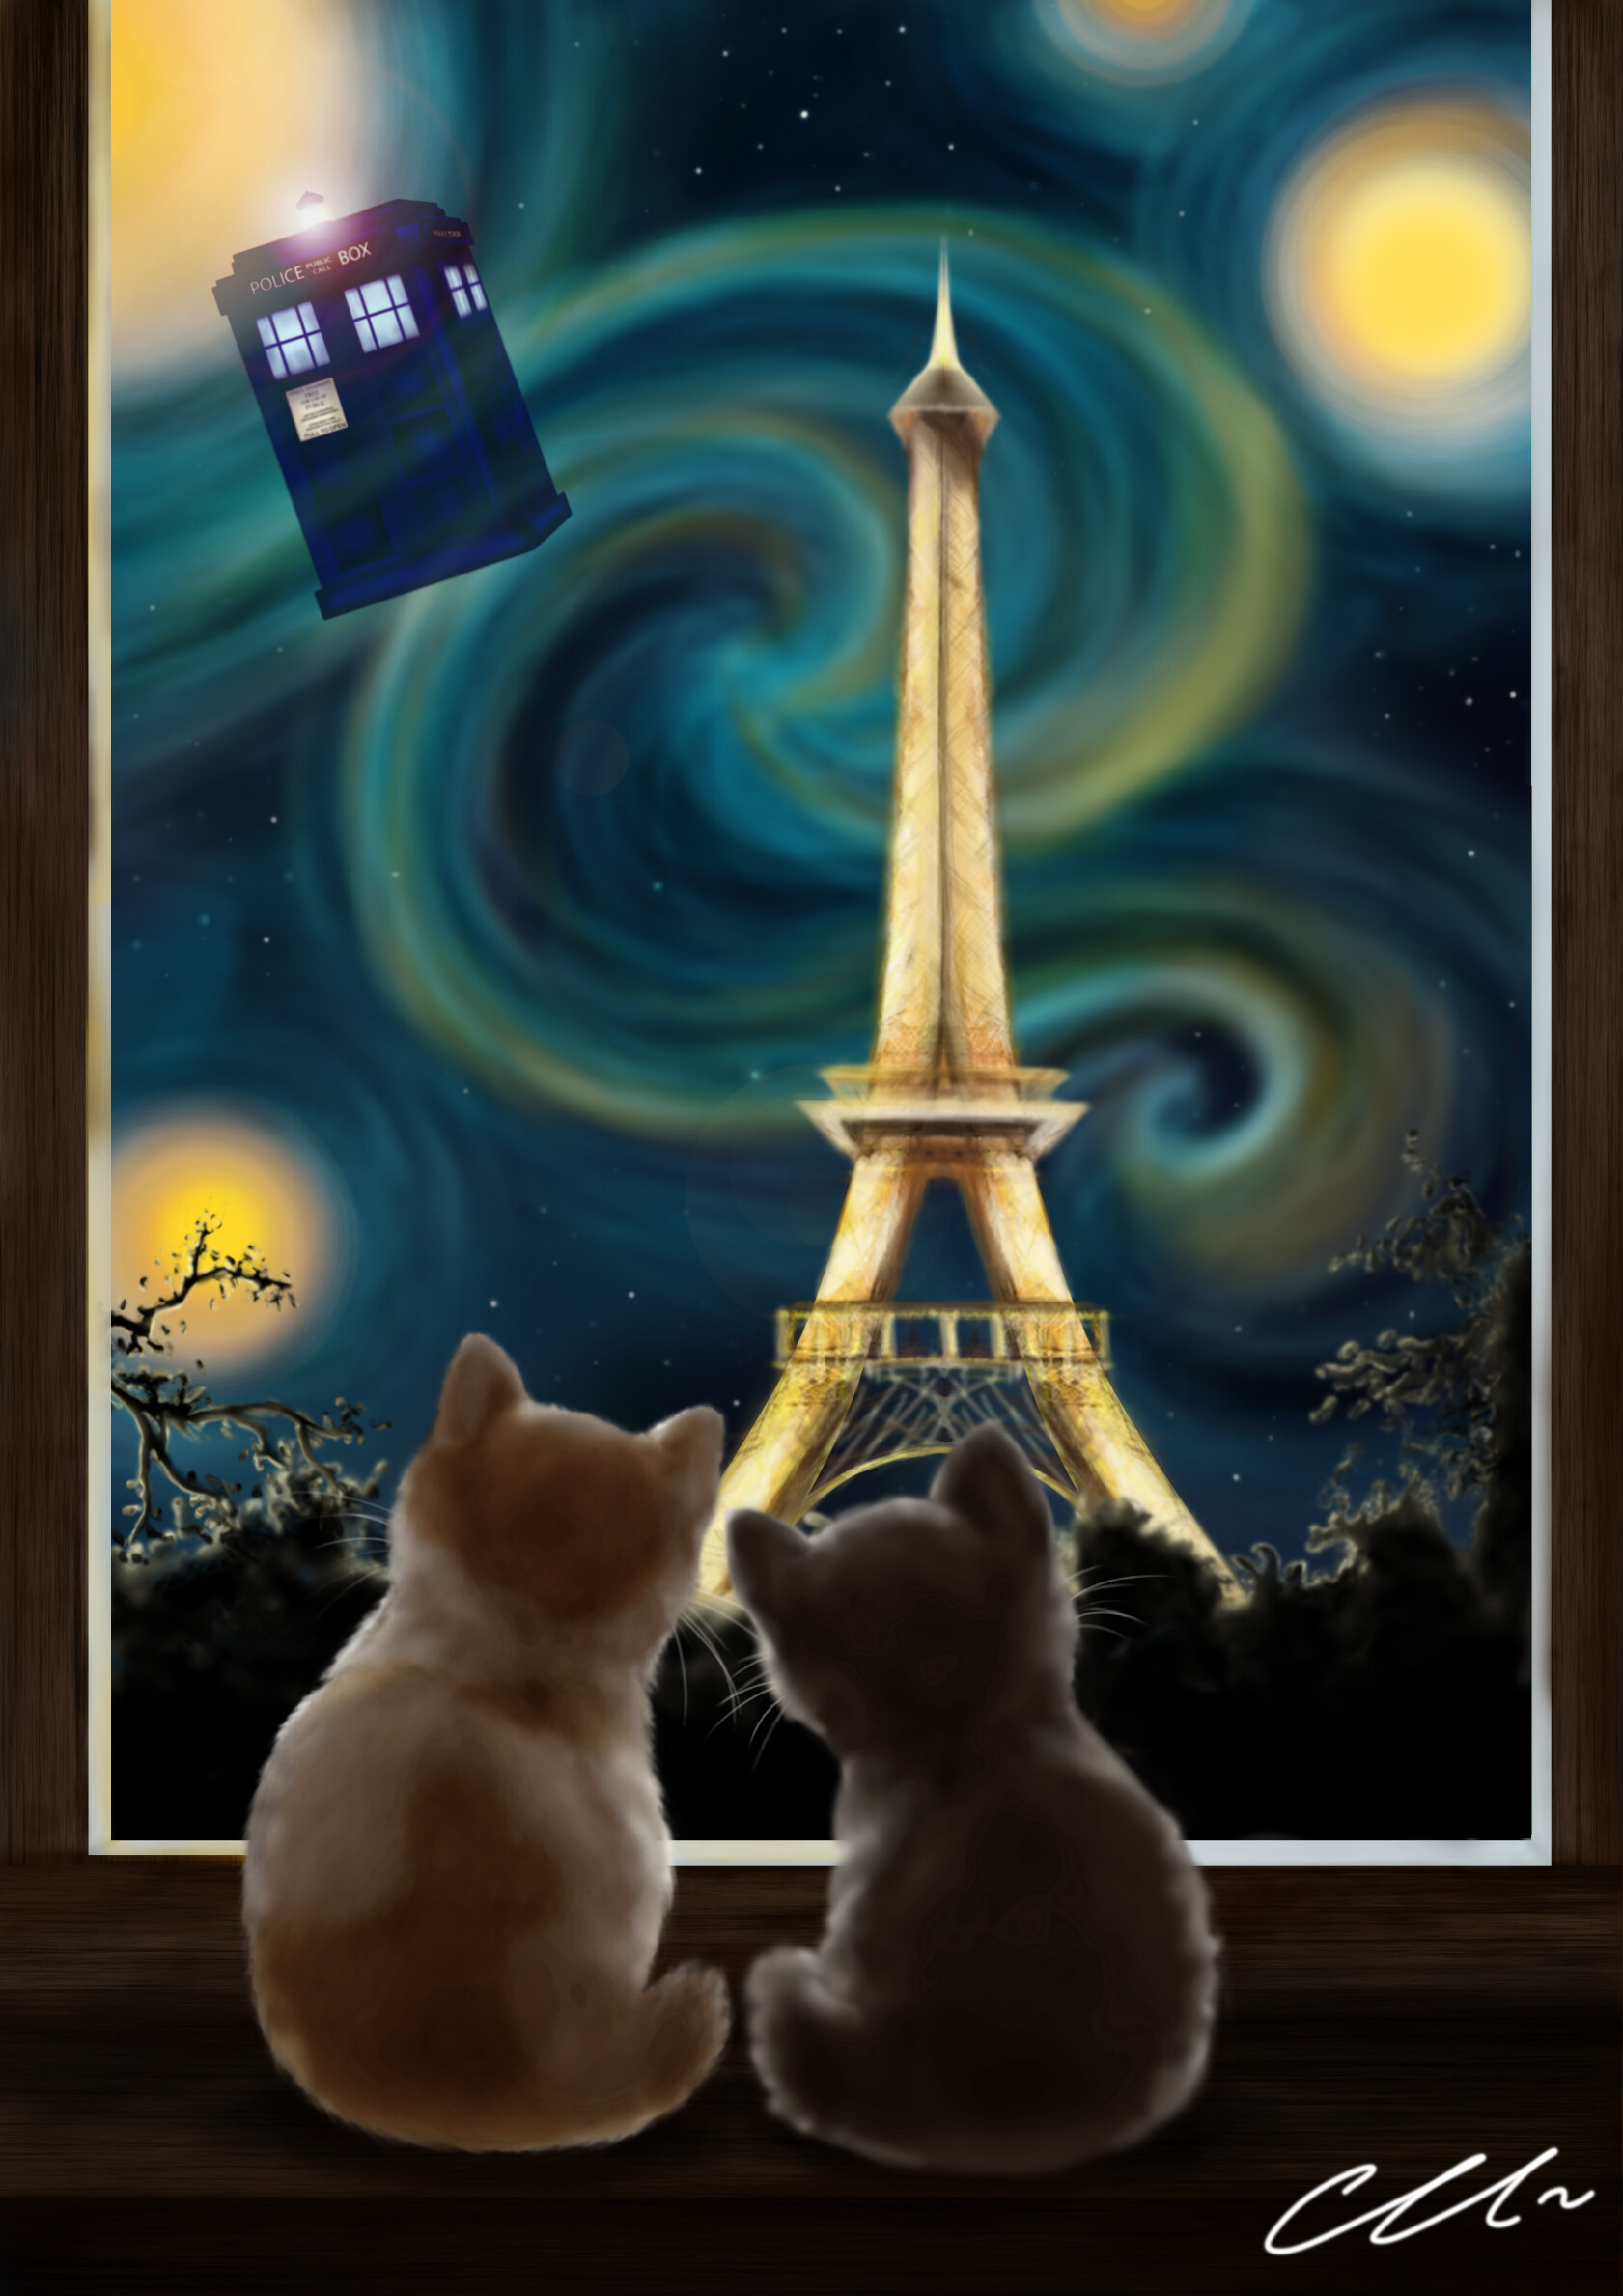 Cats in Paris,romantic night, Eiffel Tower, for cat lovers